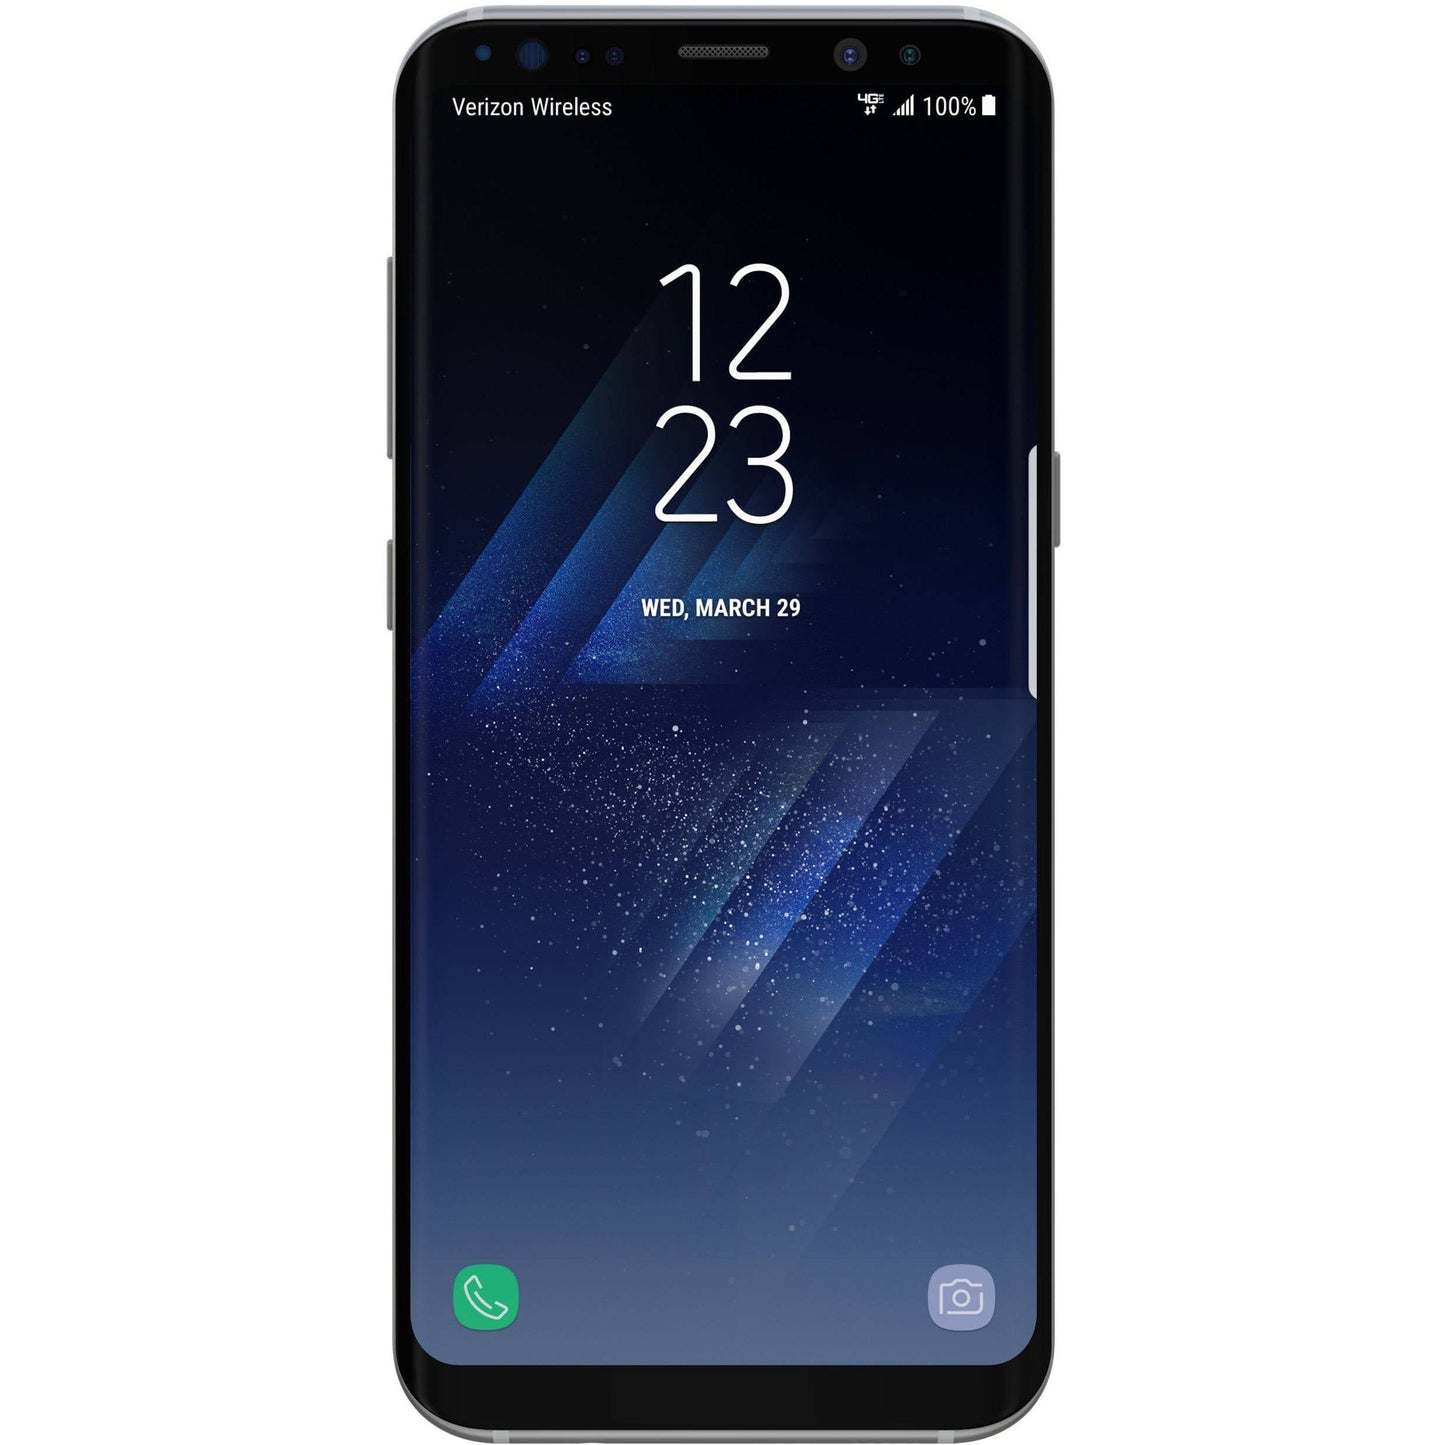 Samsung Galaxy S8 - 64 GB - Arctic Silver - T-Mobile - GSM